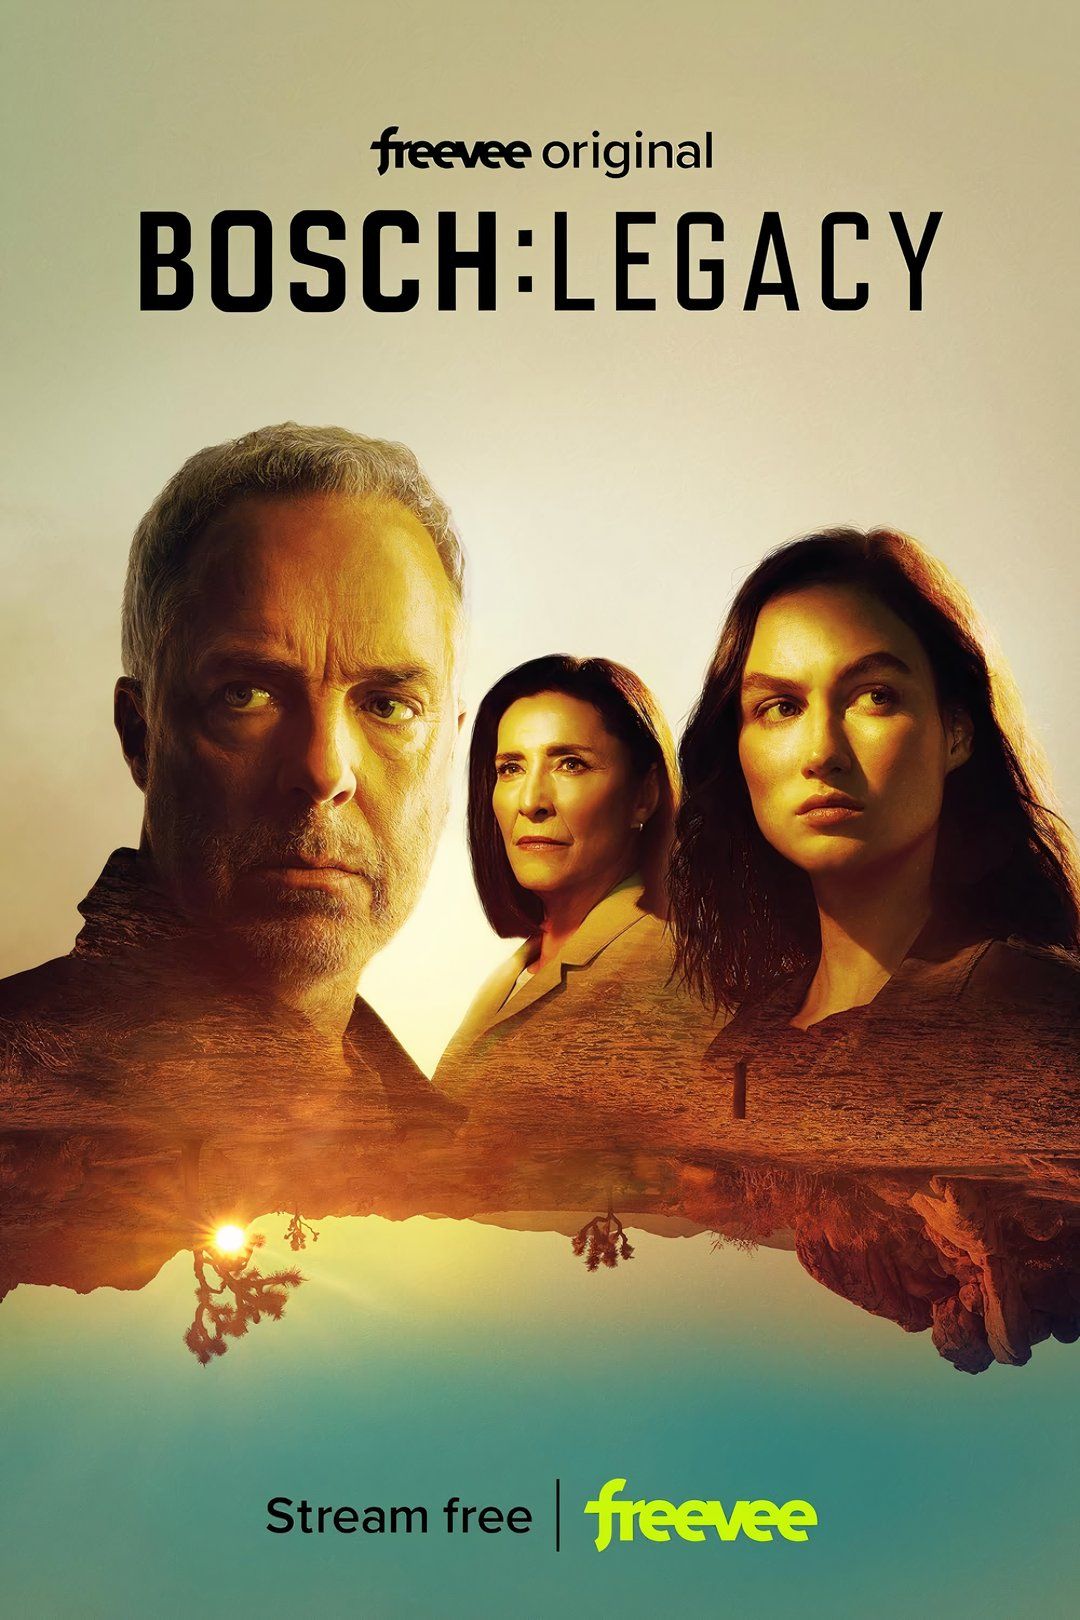 Bosch Legacy cast on the TV show poster